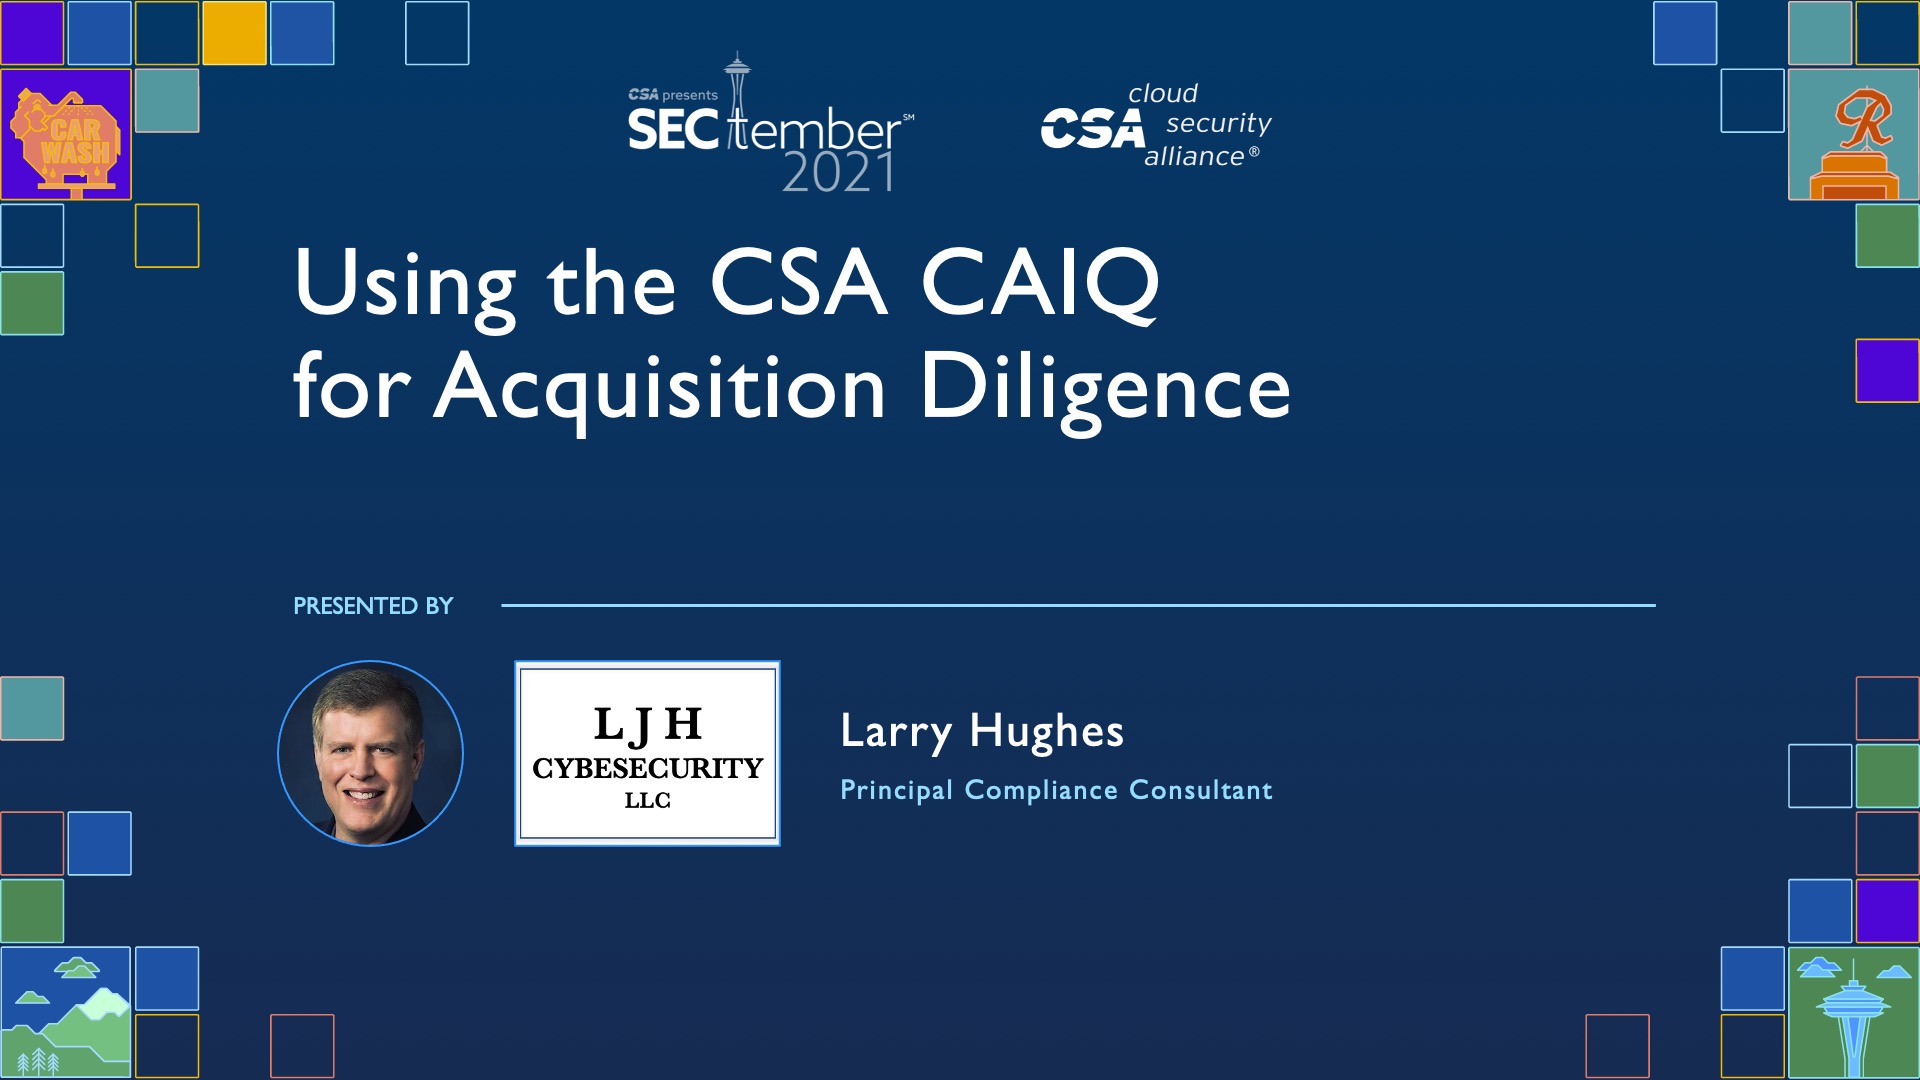 Using the CSA CAIQ for Acquisition Diligence